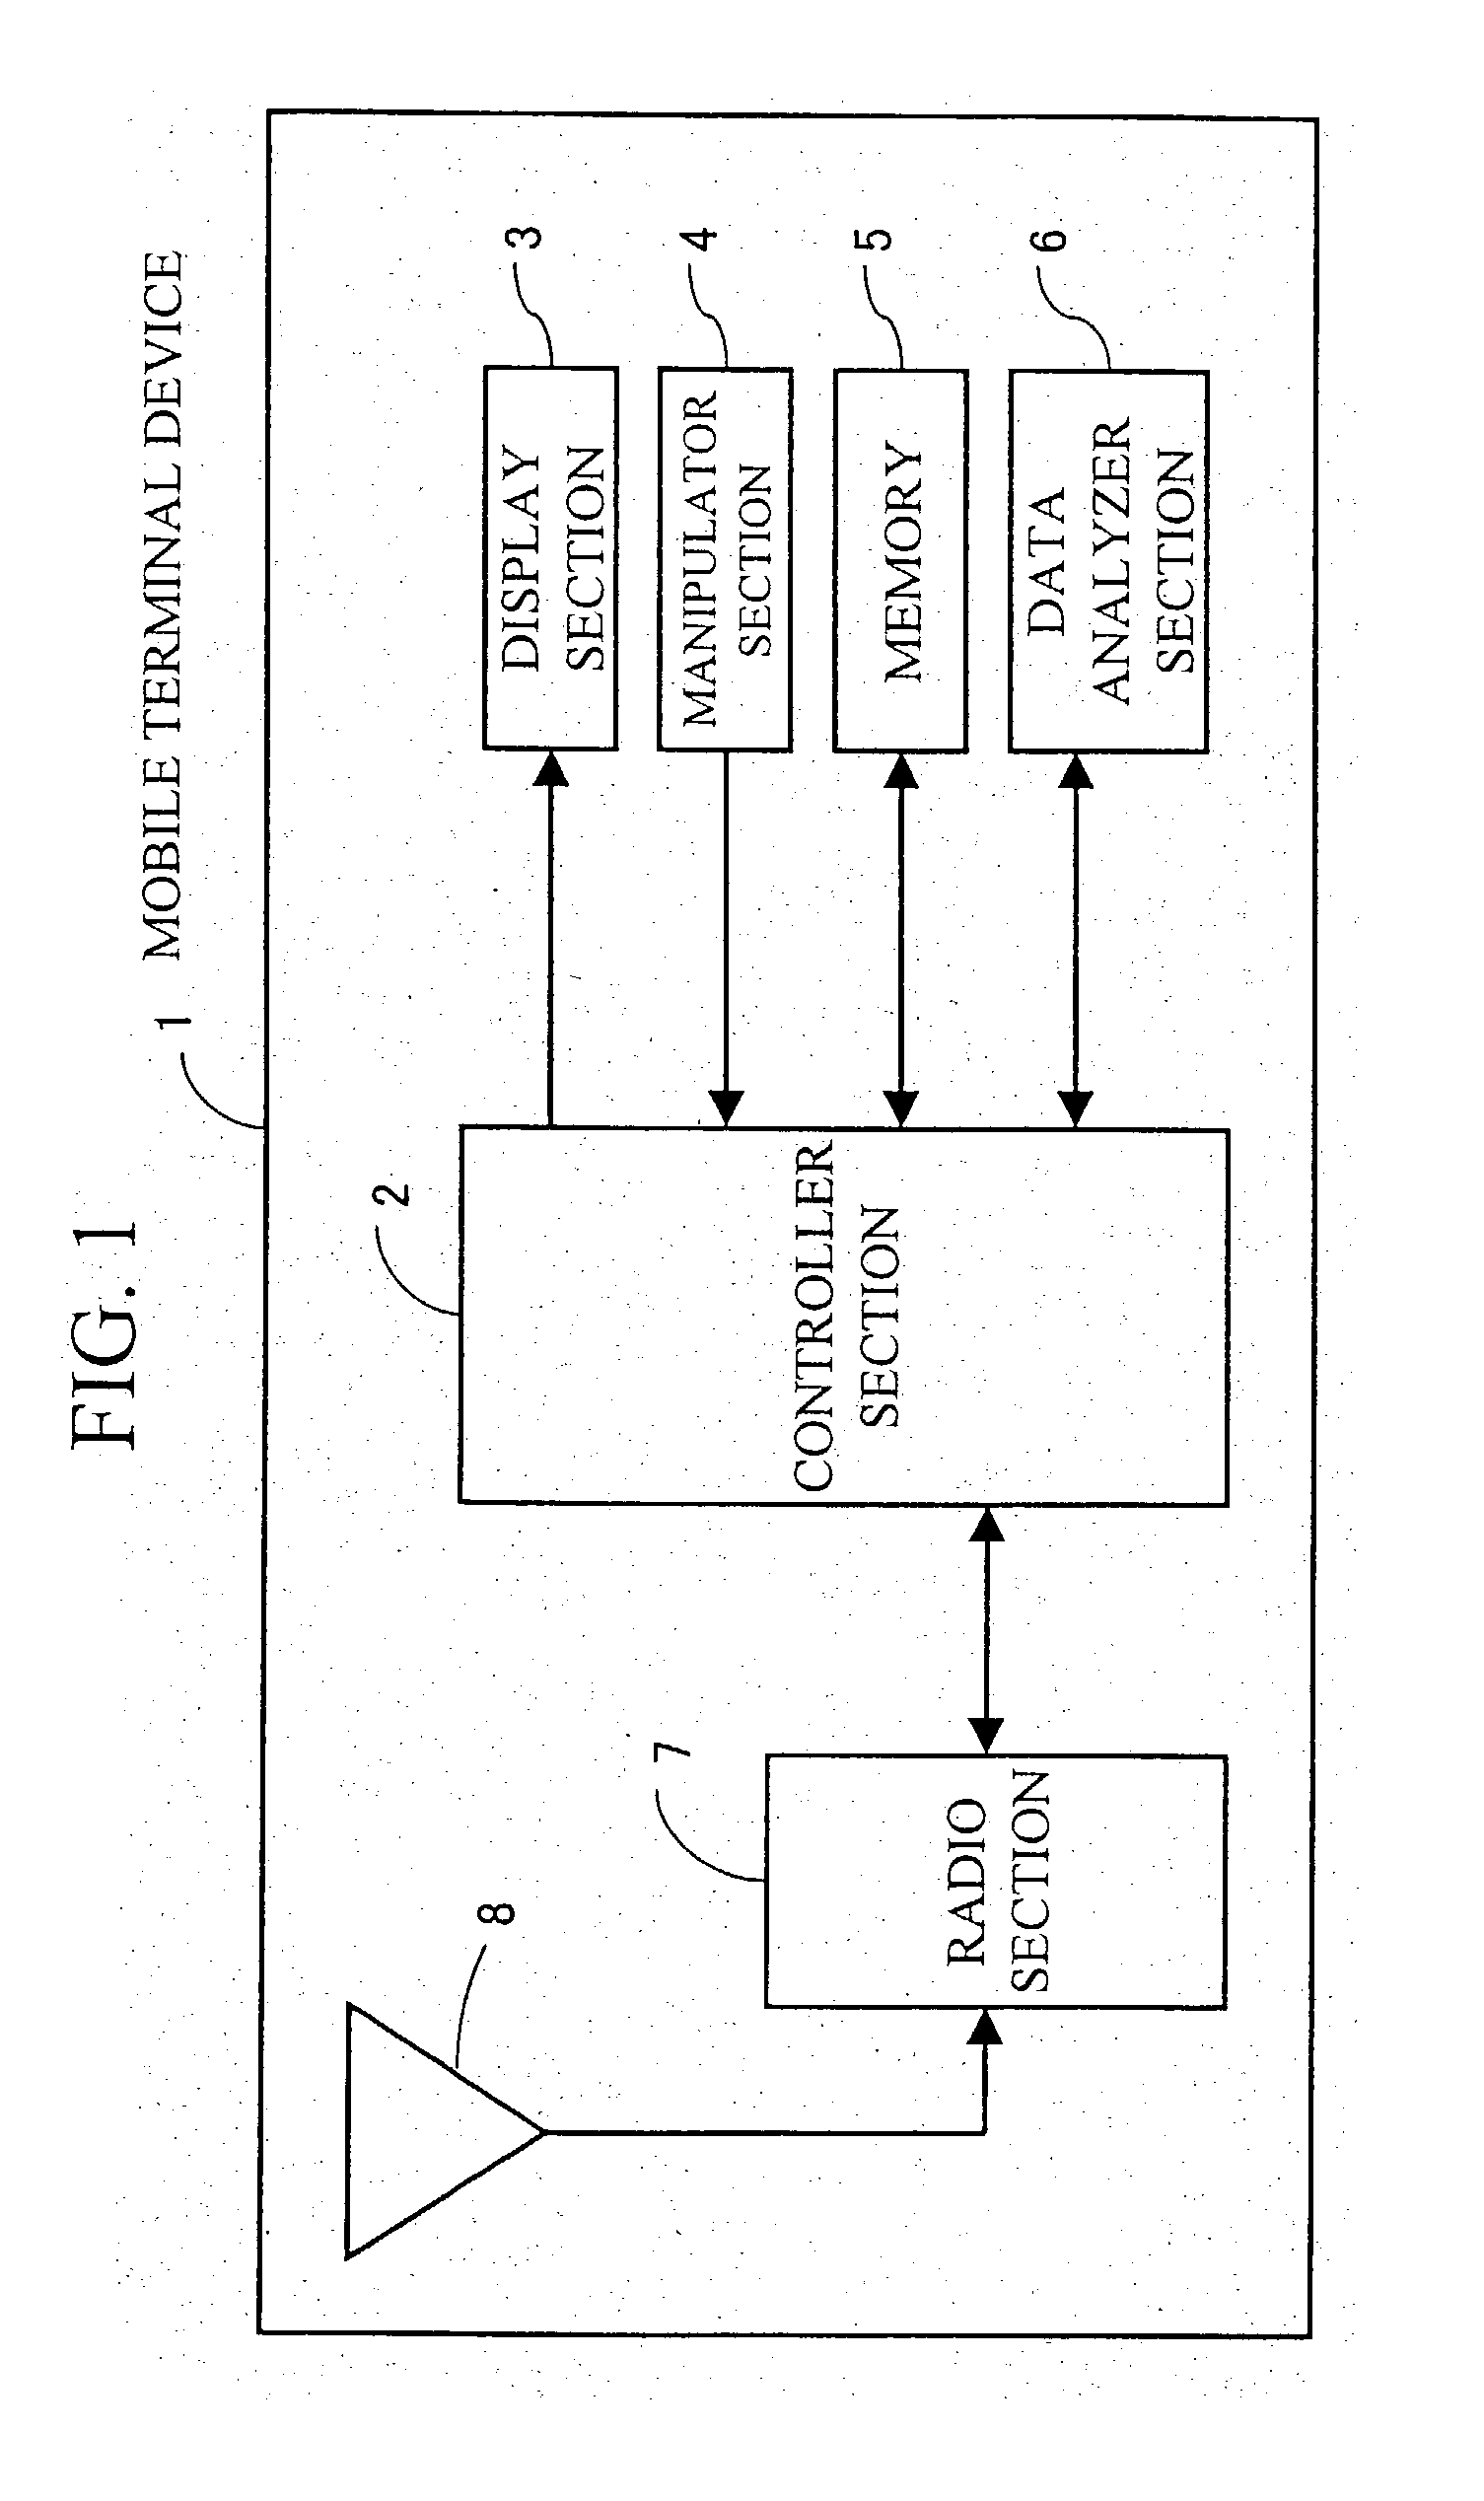 System and method for automatically changing user data